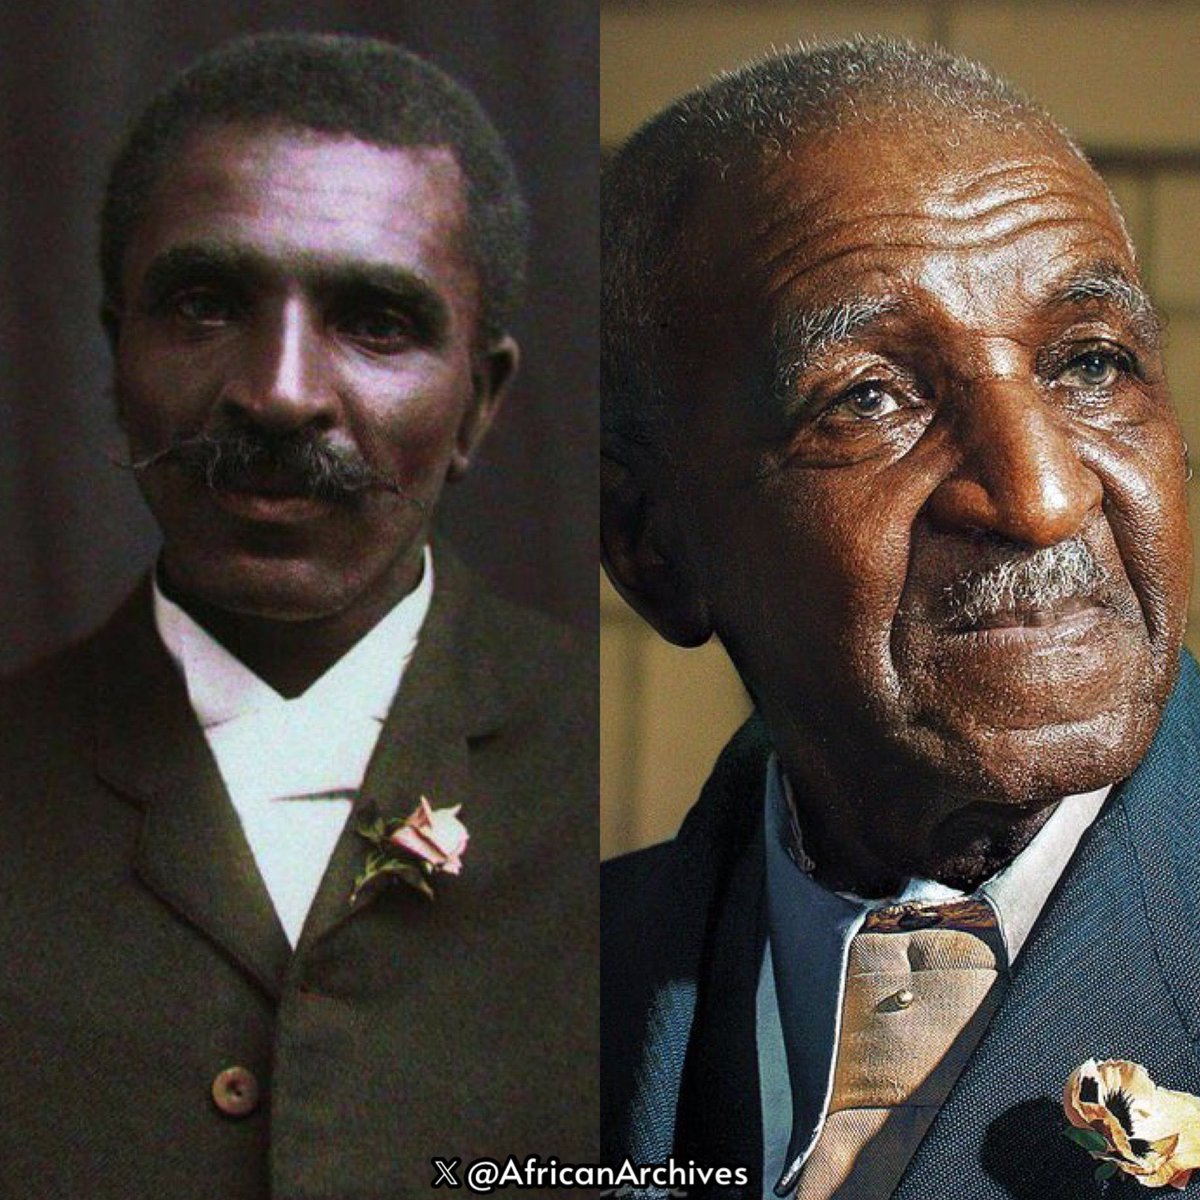 George Washington Carver had a difficult start in life. Born sometime around 1864, his father died shortly before George's birth, likely from an accident when he was out hauling wood. And only weeks after birth, slave traders kidnapped George and his mother. Rescued would not be